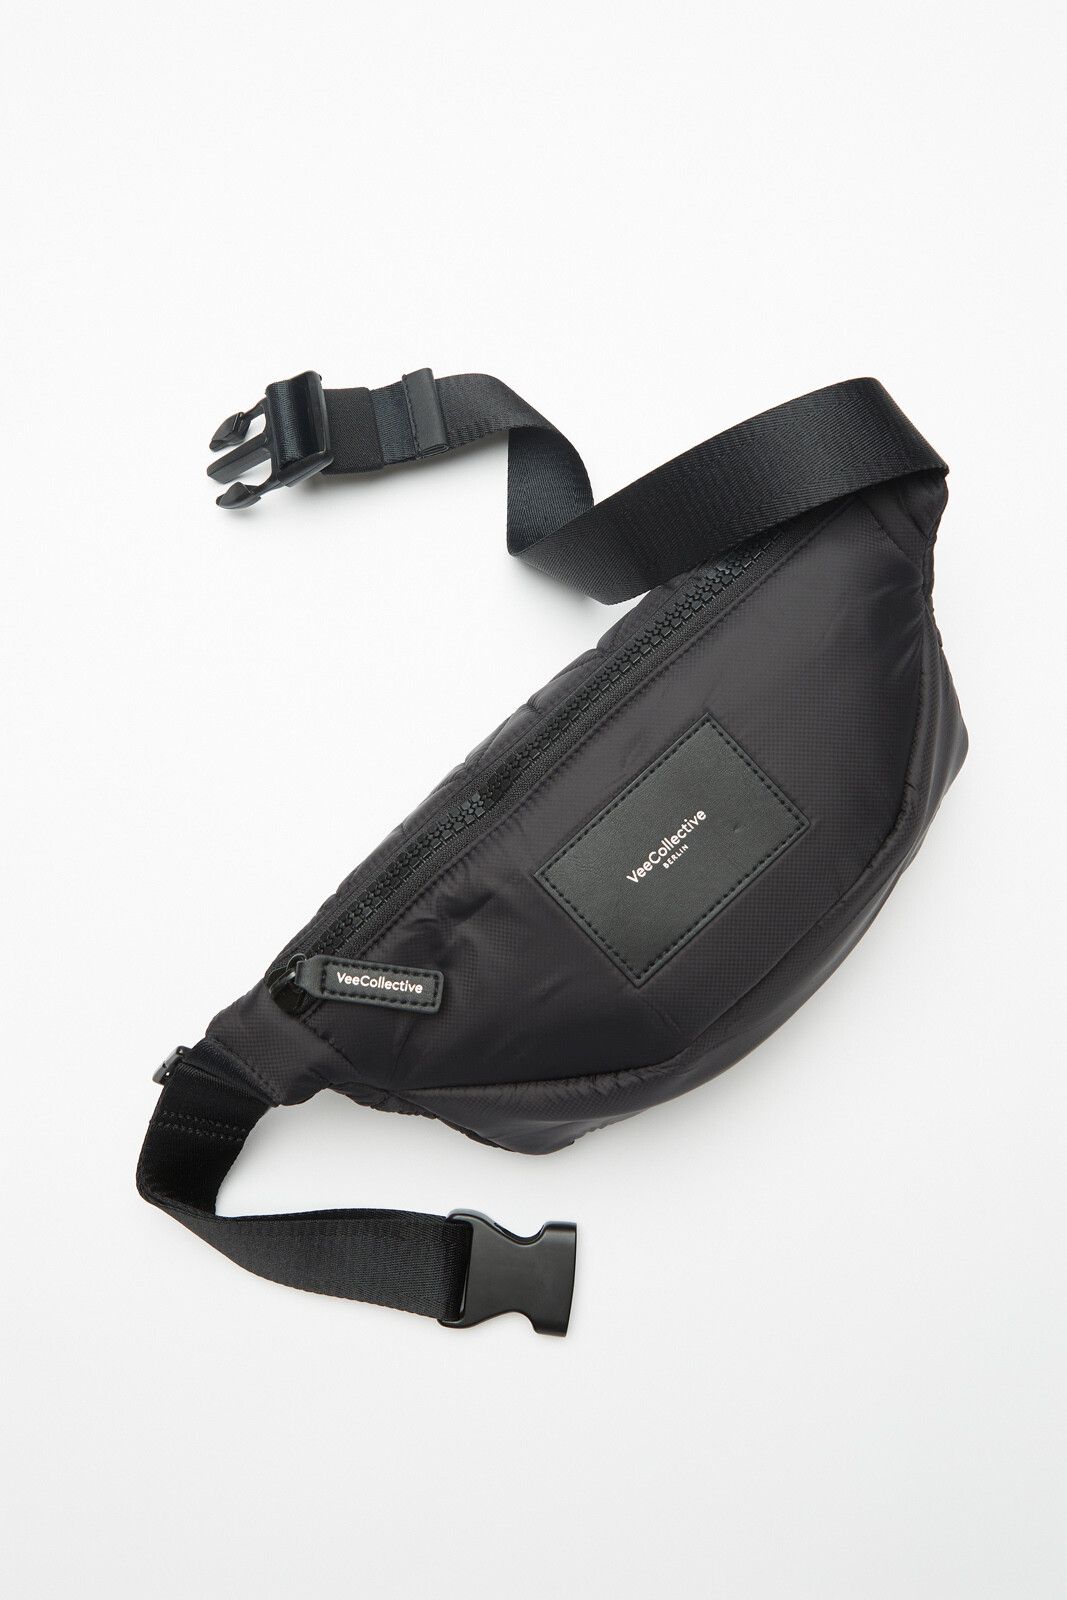 VEE COLLECTIVE Fanny Pack | EVEREVE | Evereve